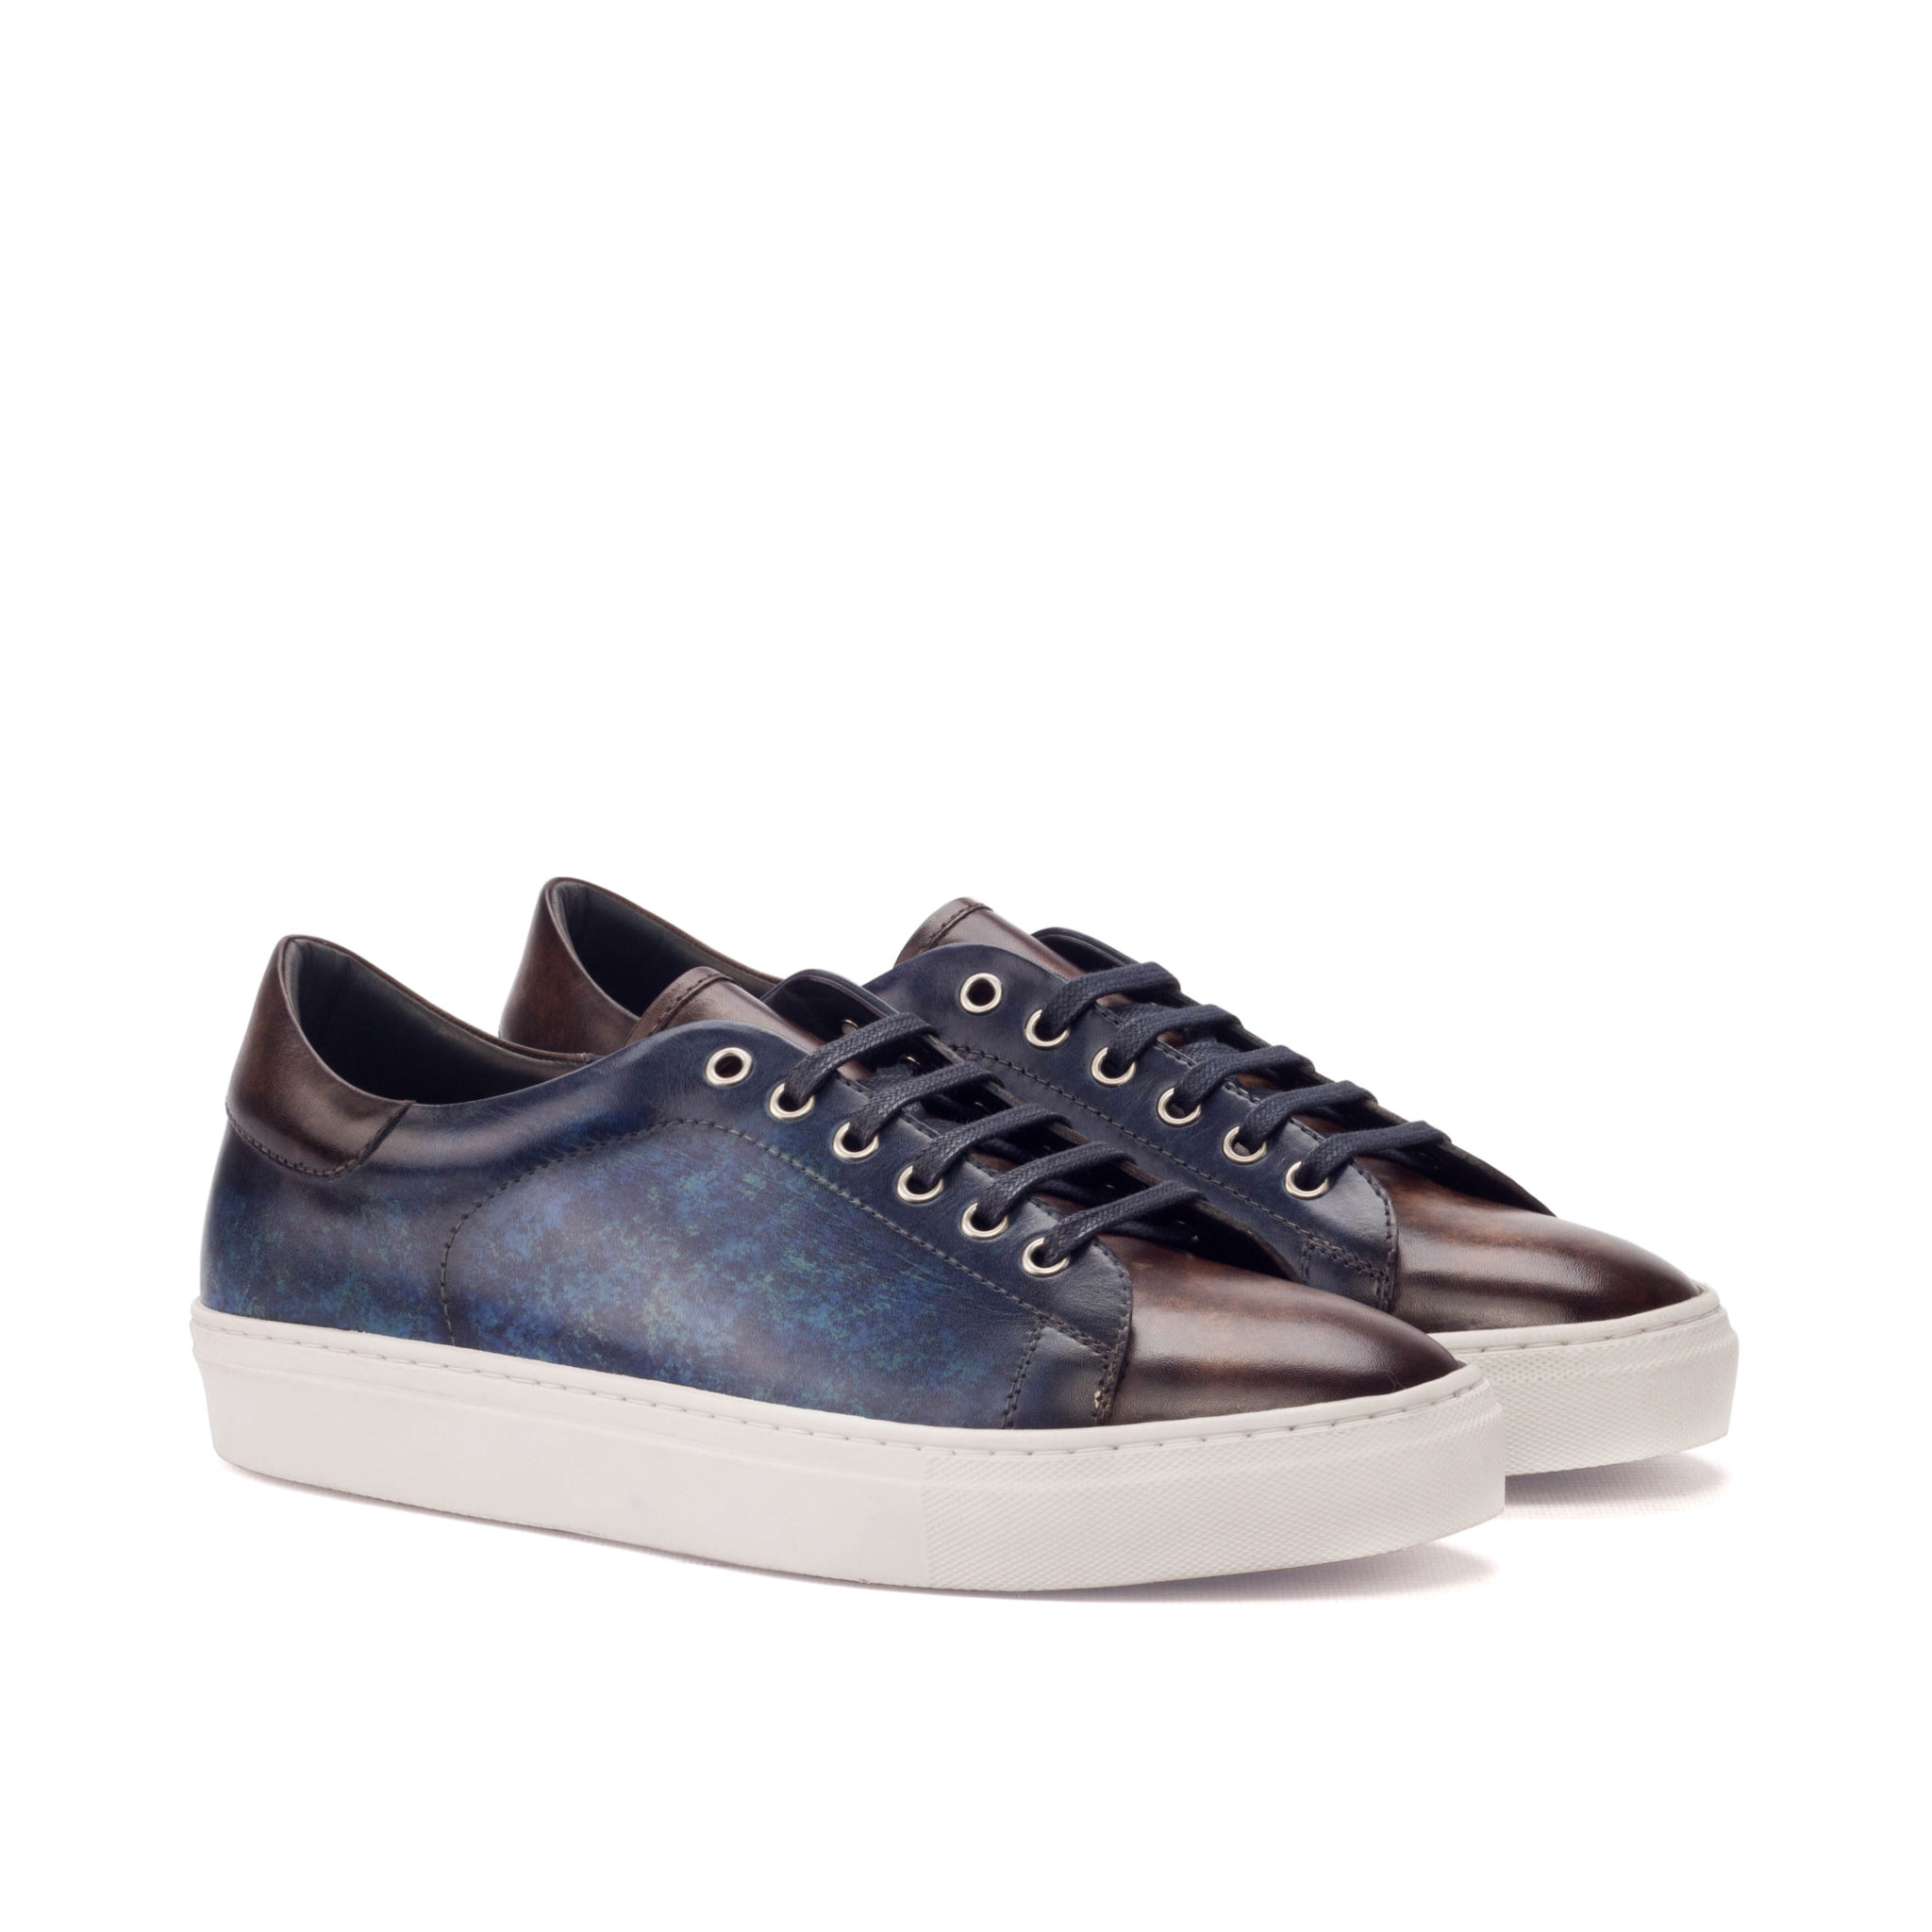 Blue/Brown Leather Patina Finish Trainer Shoes | JMD Menswear